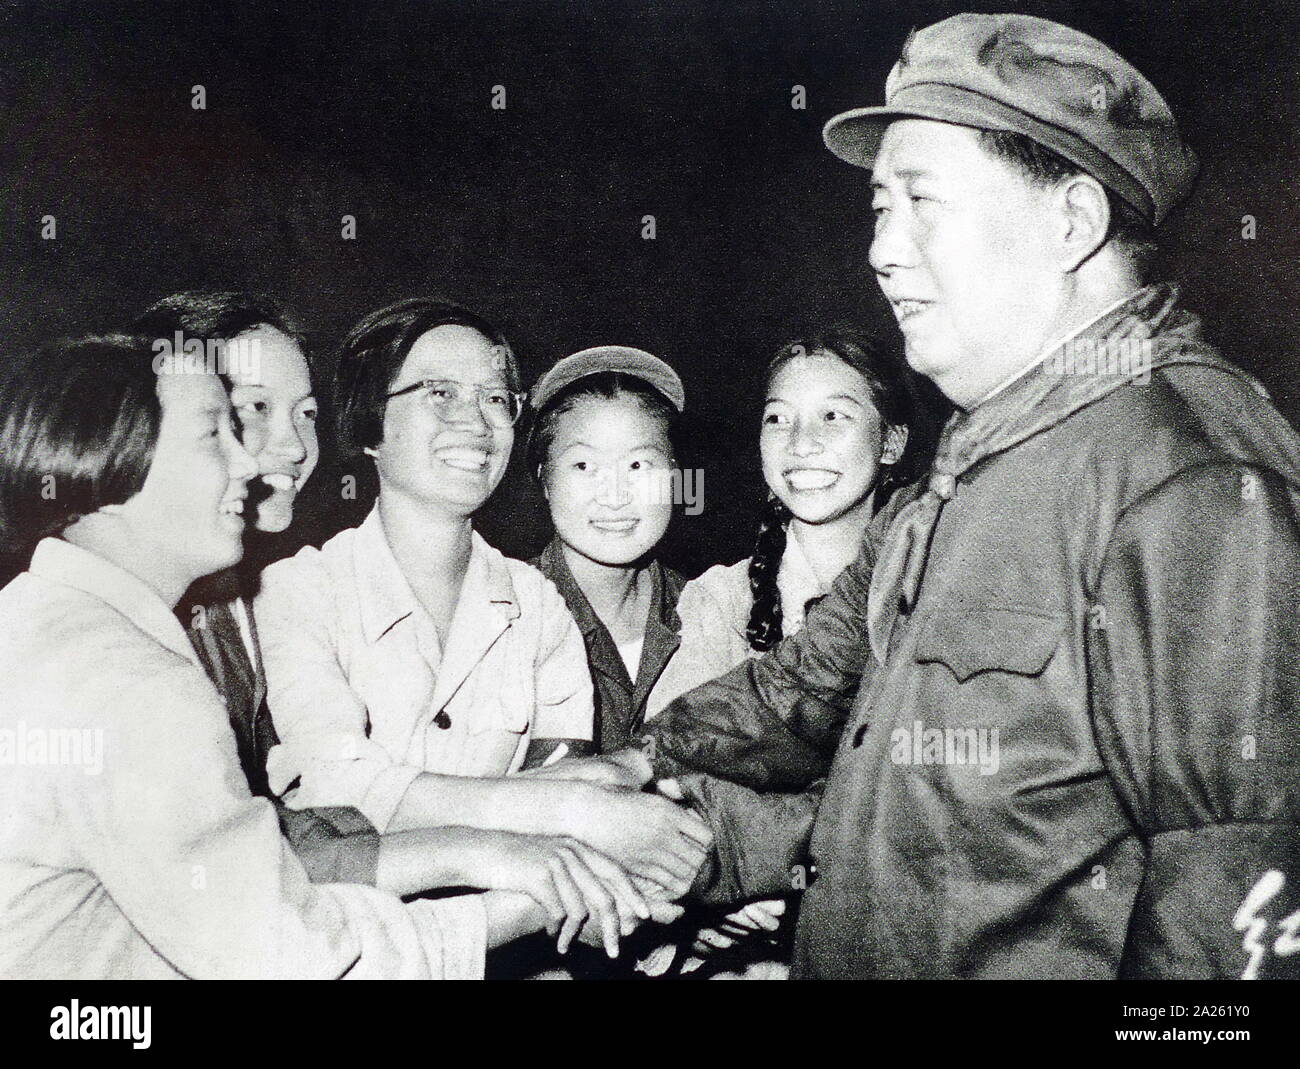 Chairman Mao with female Red Guards during the Cultural Revolution. 1966. Mao Zedong (1893 - September 9, 1976), was a Chinese communist revolutionary who became the founding father of the People's Republic of China (PRC), which he ruled as the Chairman of the Communist Party of China from its establishment in 1949 until his death Stock Photo